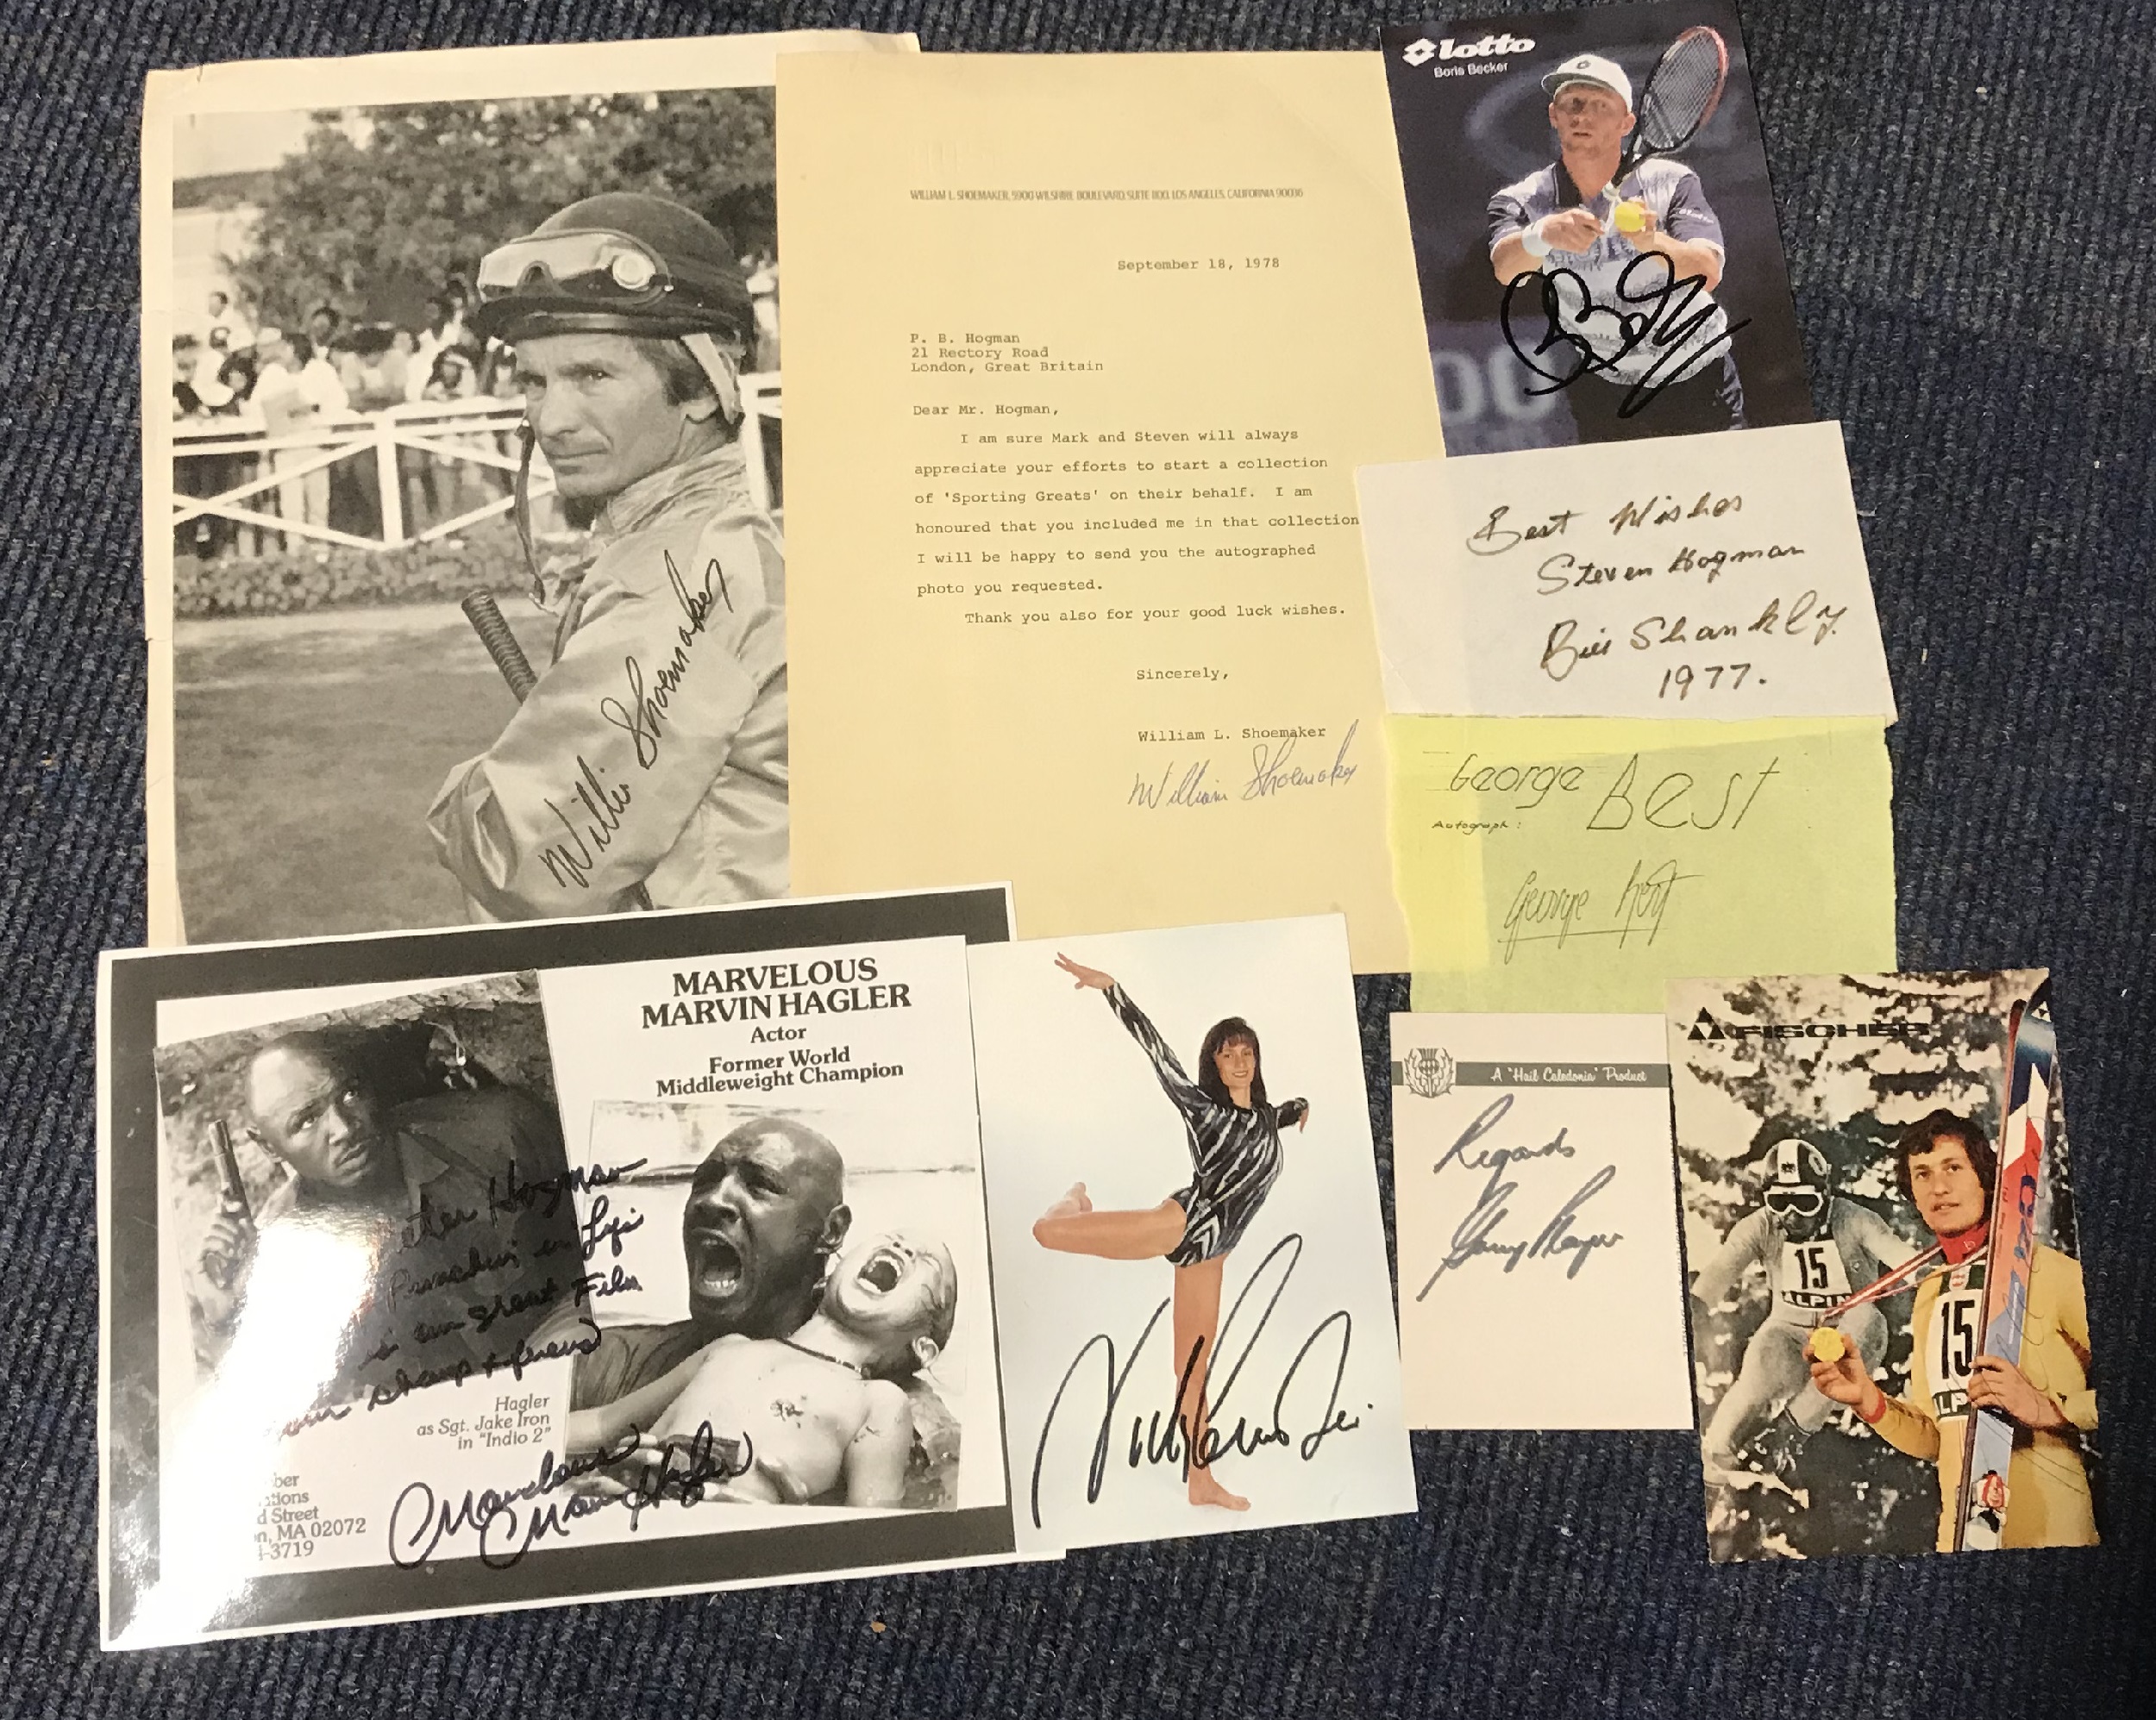 Sport signed collection includes George Best and Bill Shankly signed pages, Nadia Comaneci